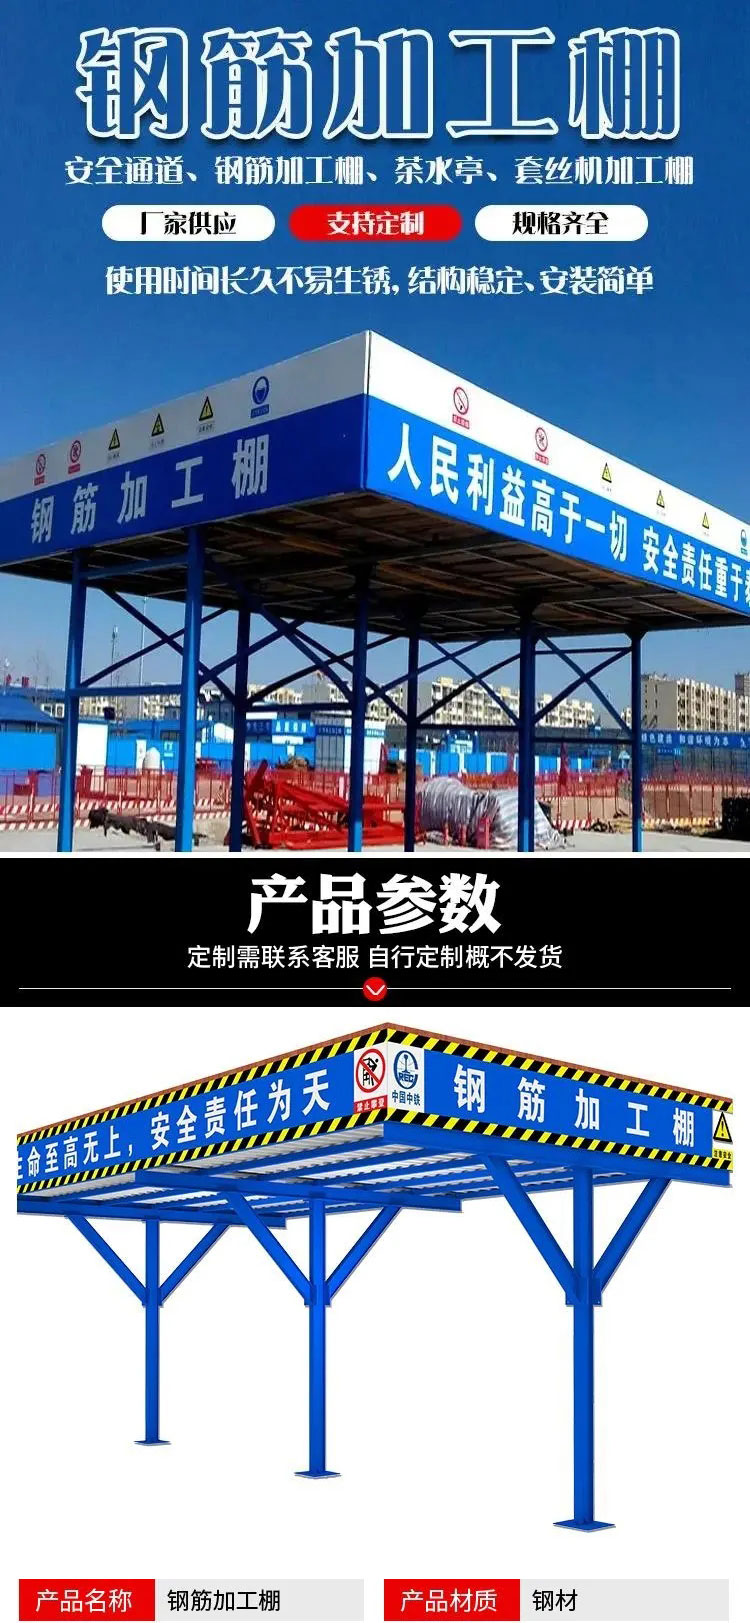 Standardized steel bar processing shed for construction sites, protective shed for assembled work safety distribution box, protective shed